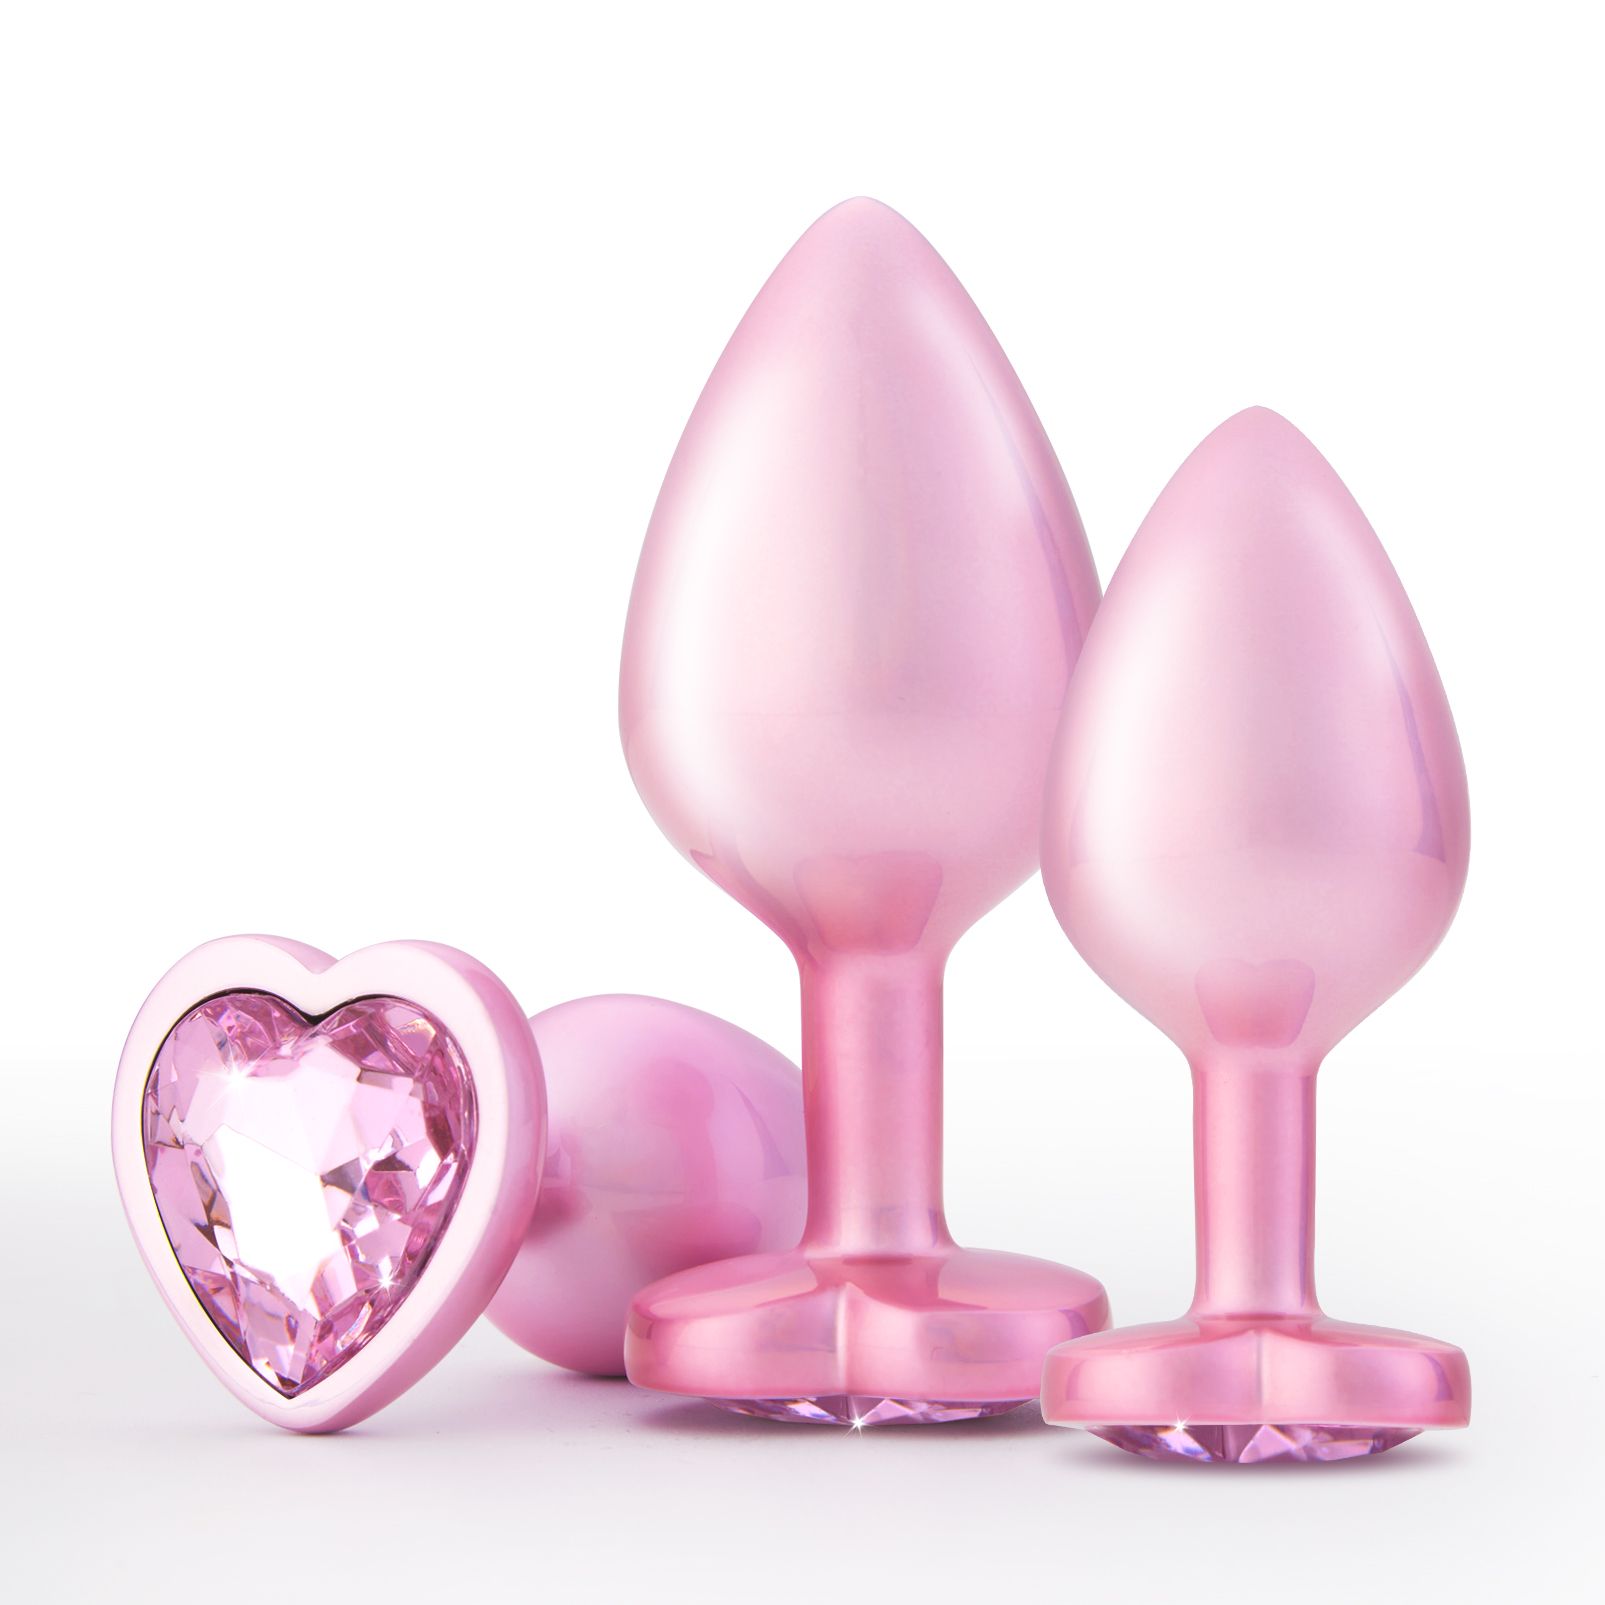 Anal Butt Plug Sex Toys - 3 PCS Anus Plug with Crystal Diamond Base Adult Anal Trainer Kit Anal Bead for Men Women and Beginners Prostate Massage | Pink